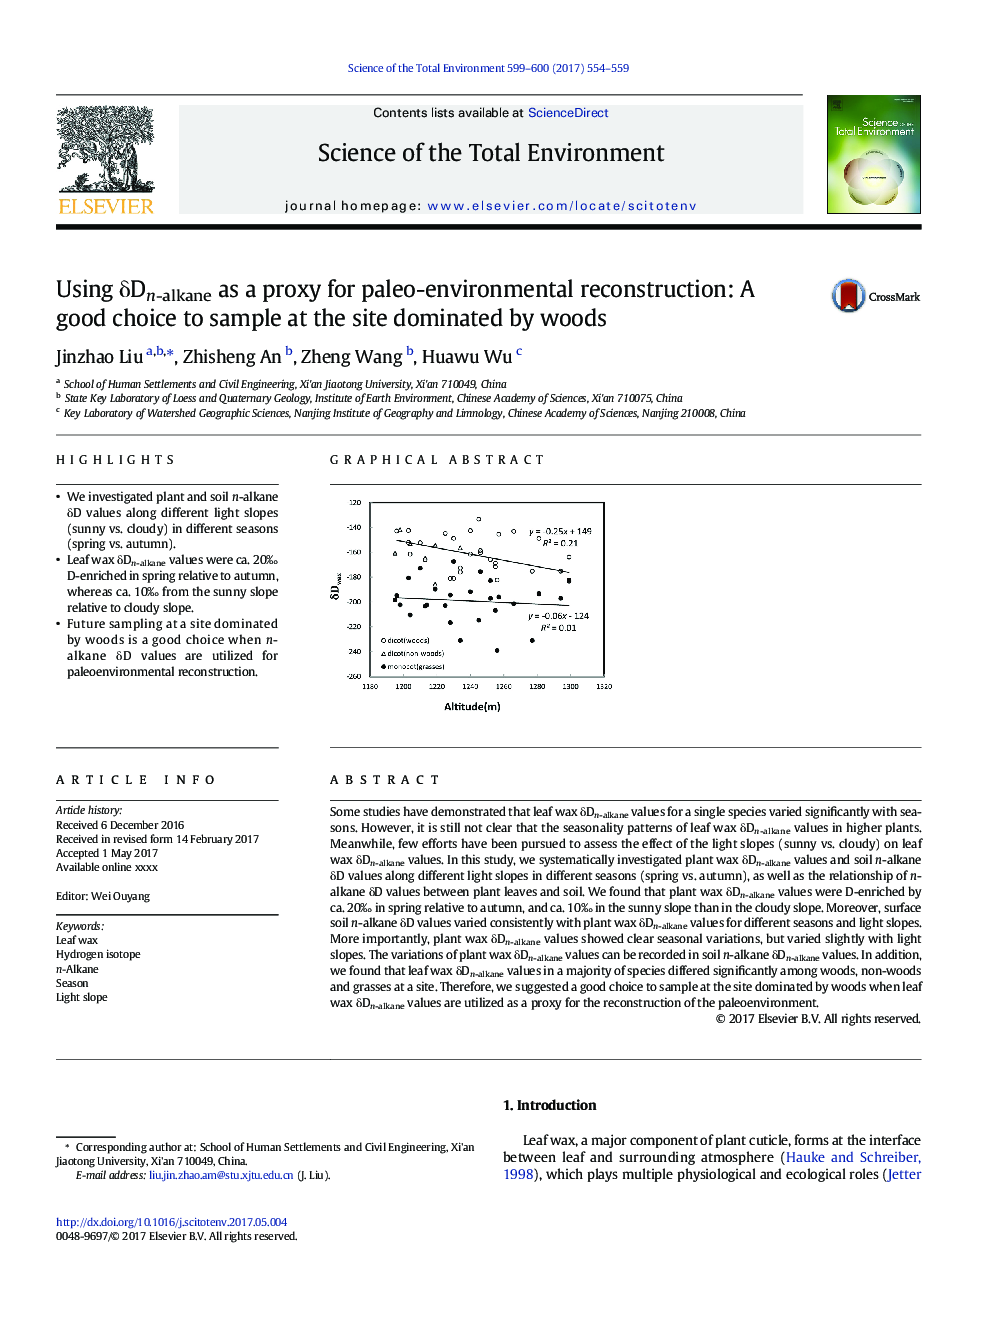 Using Î´Dn-alkane as a proxy for paleo-environmental reconstruction: A good choice to sample at the site dominated by woods